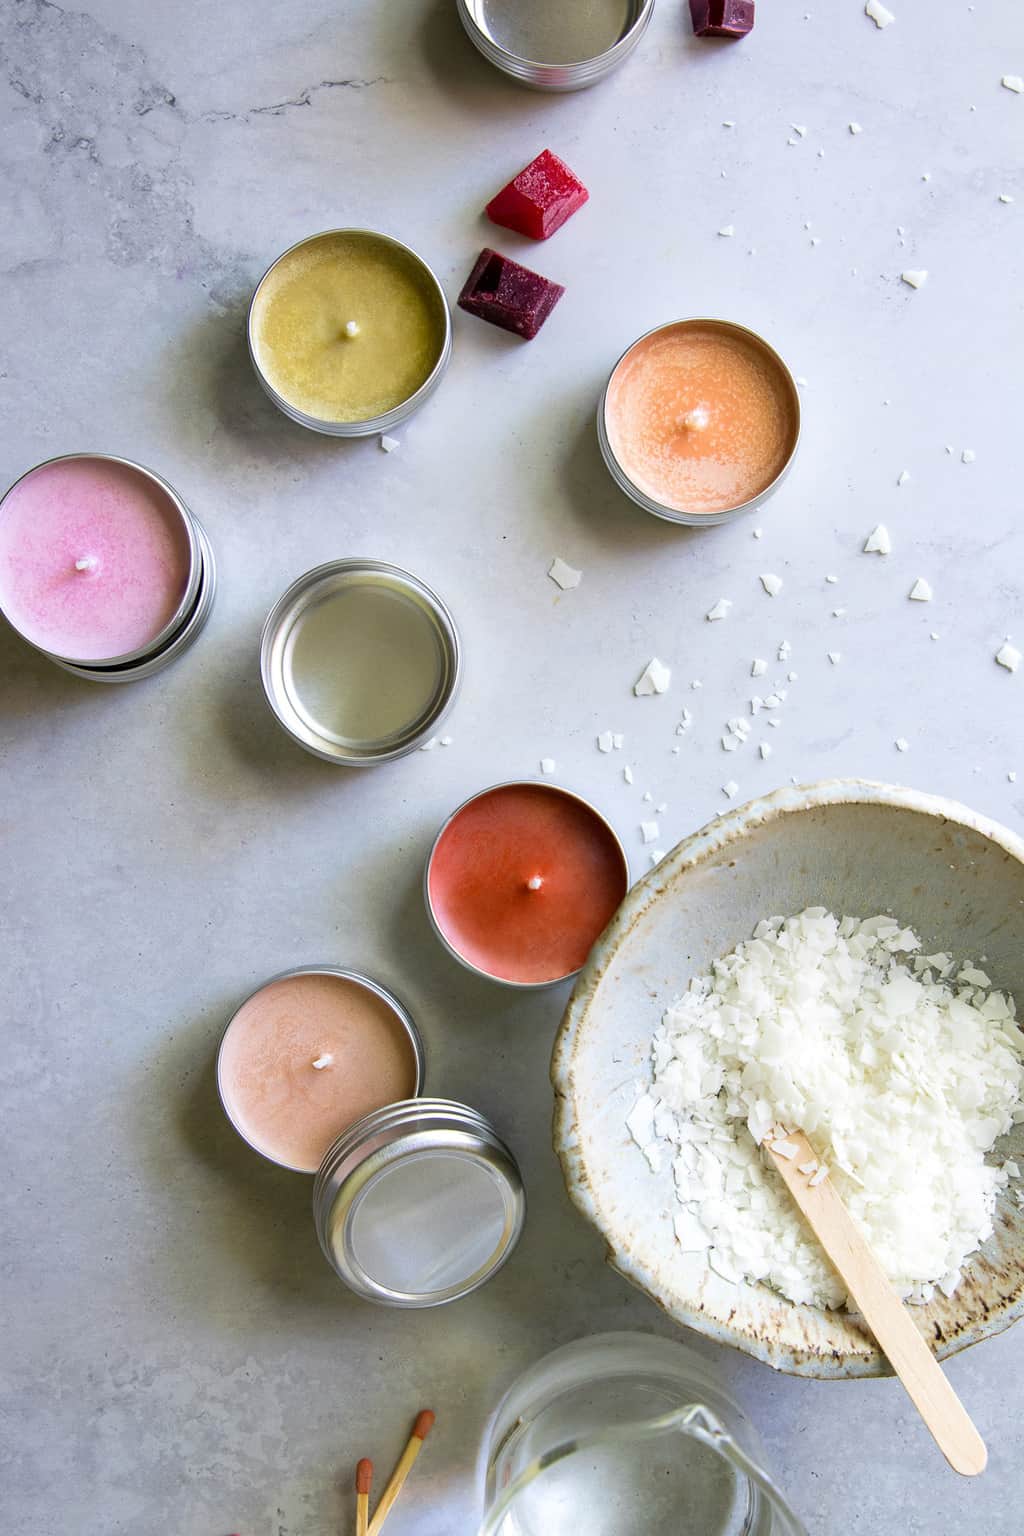 Wondering how to make festive, colorful candles? We've got all the tips and tricks you need to color candles like the pros.